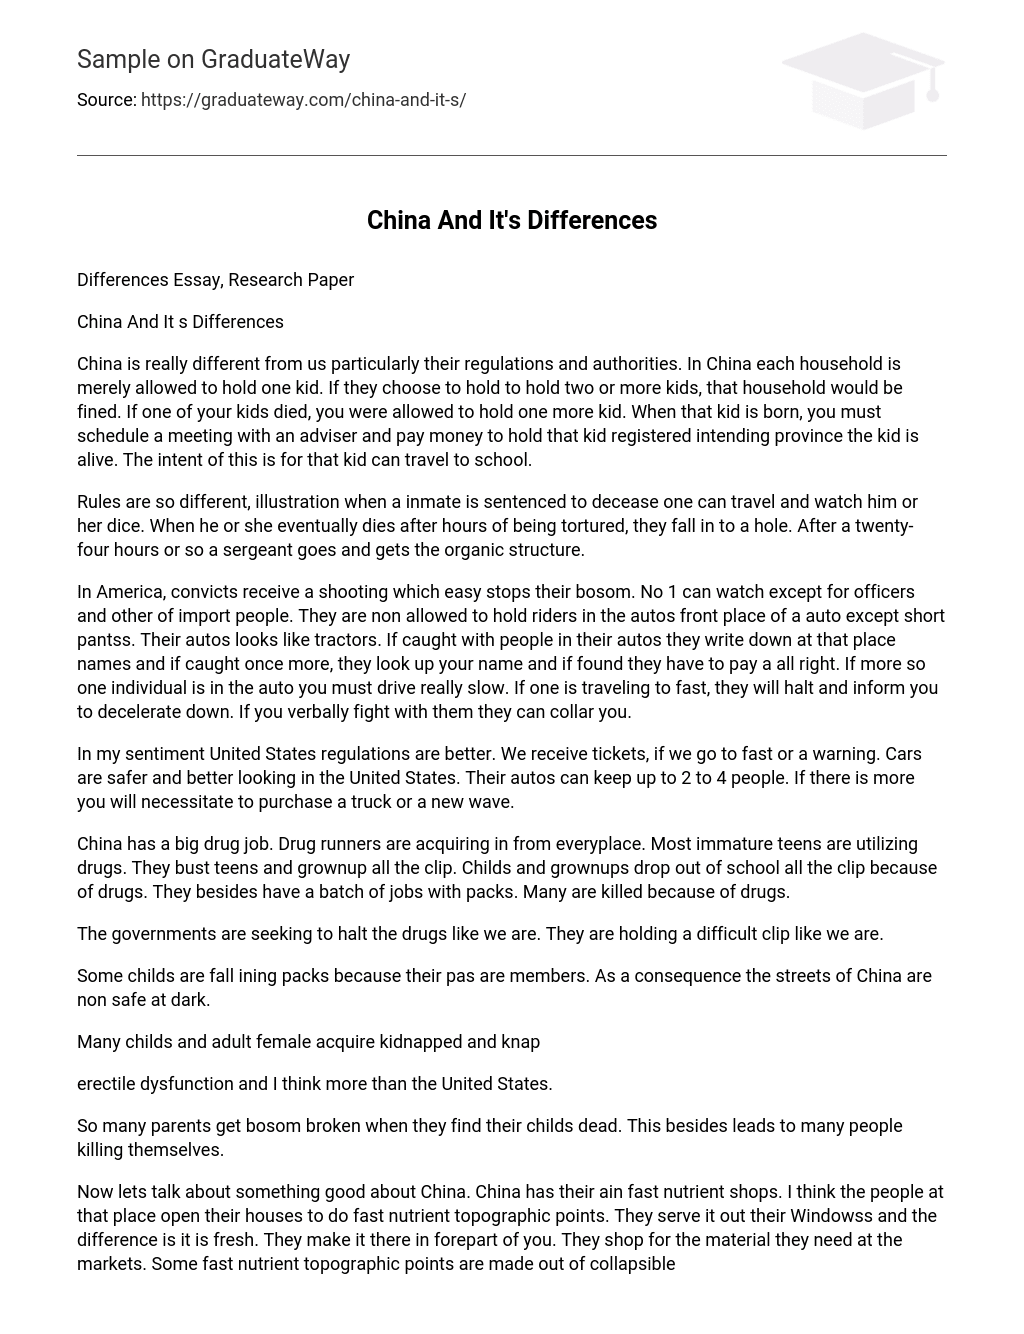 China And It’s Differences